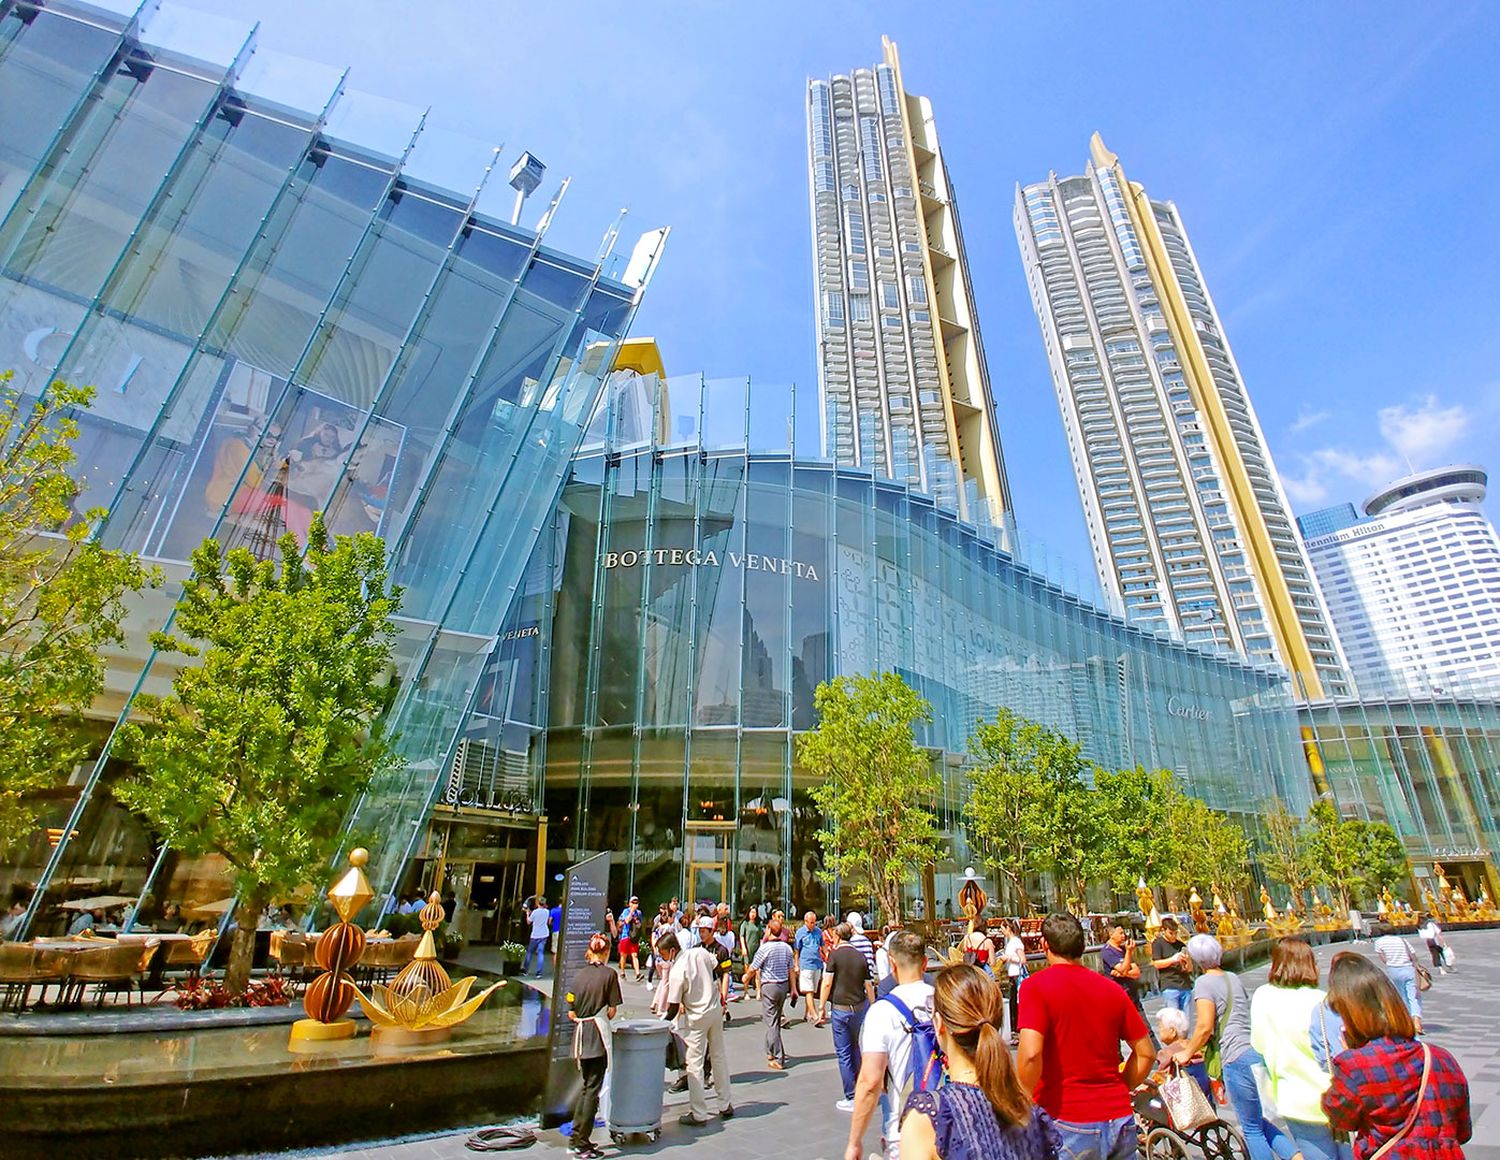 ICONSIAM - Just another shopping mall? - Binn Tour